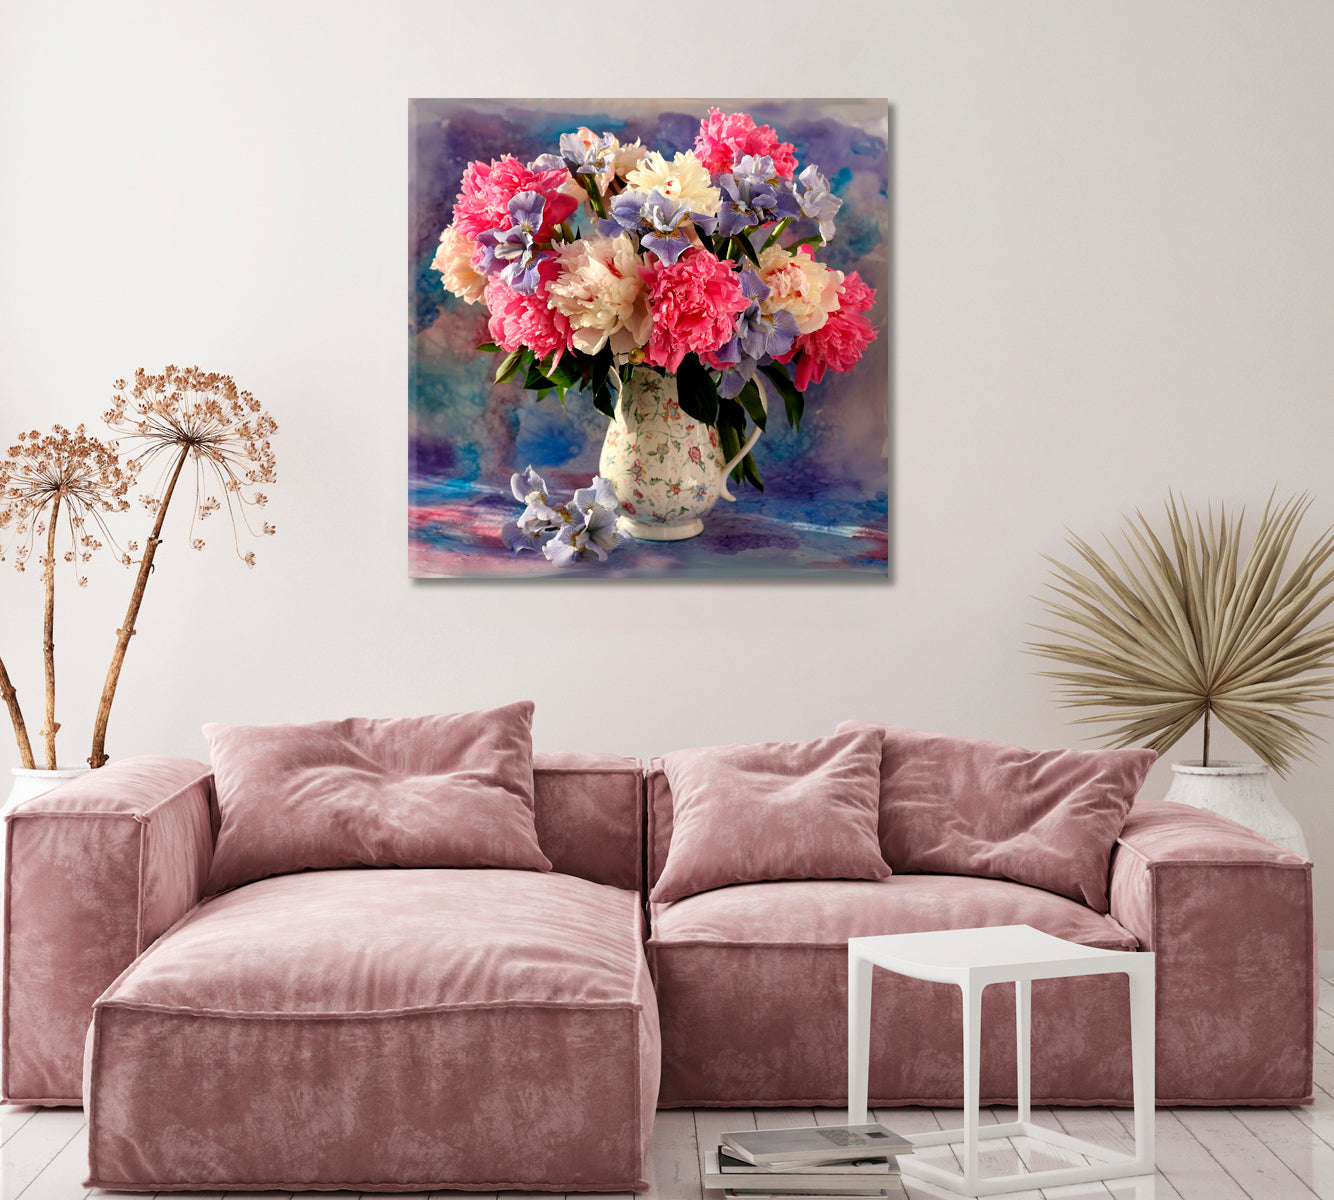 Still Life Irises and Peonies Flowers Canvas Print ArtLexy 1 Panel 12"x12" inches 